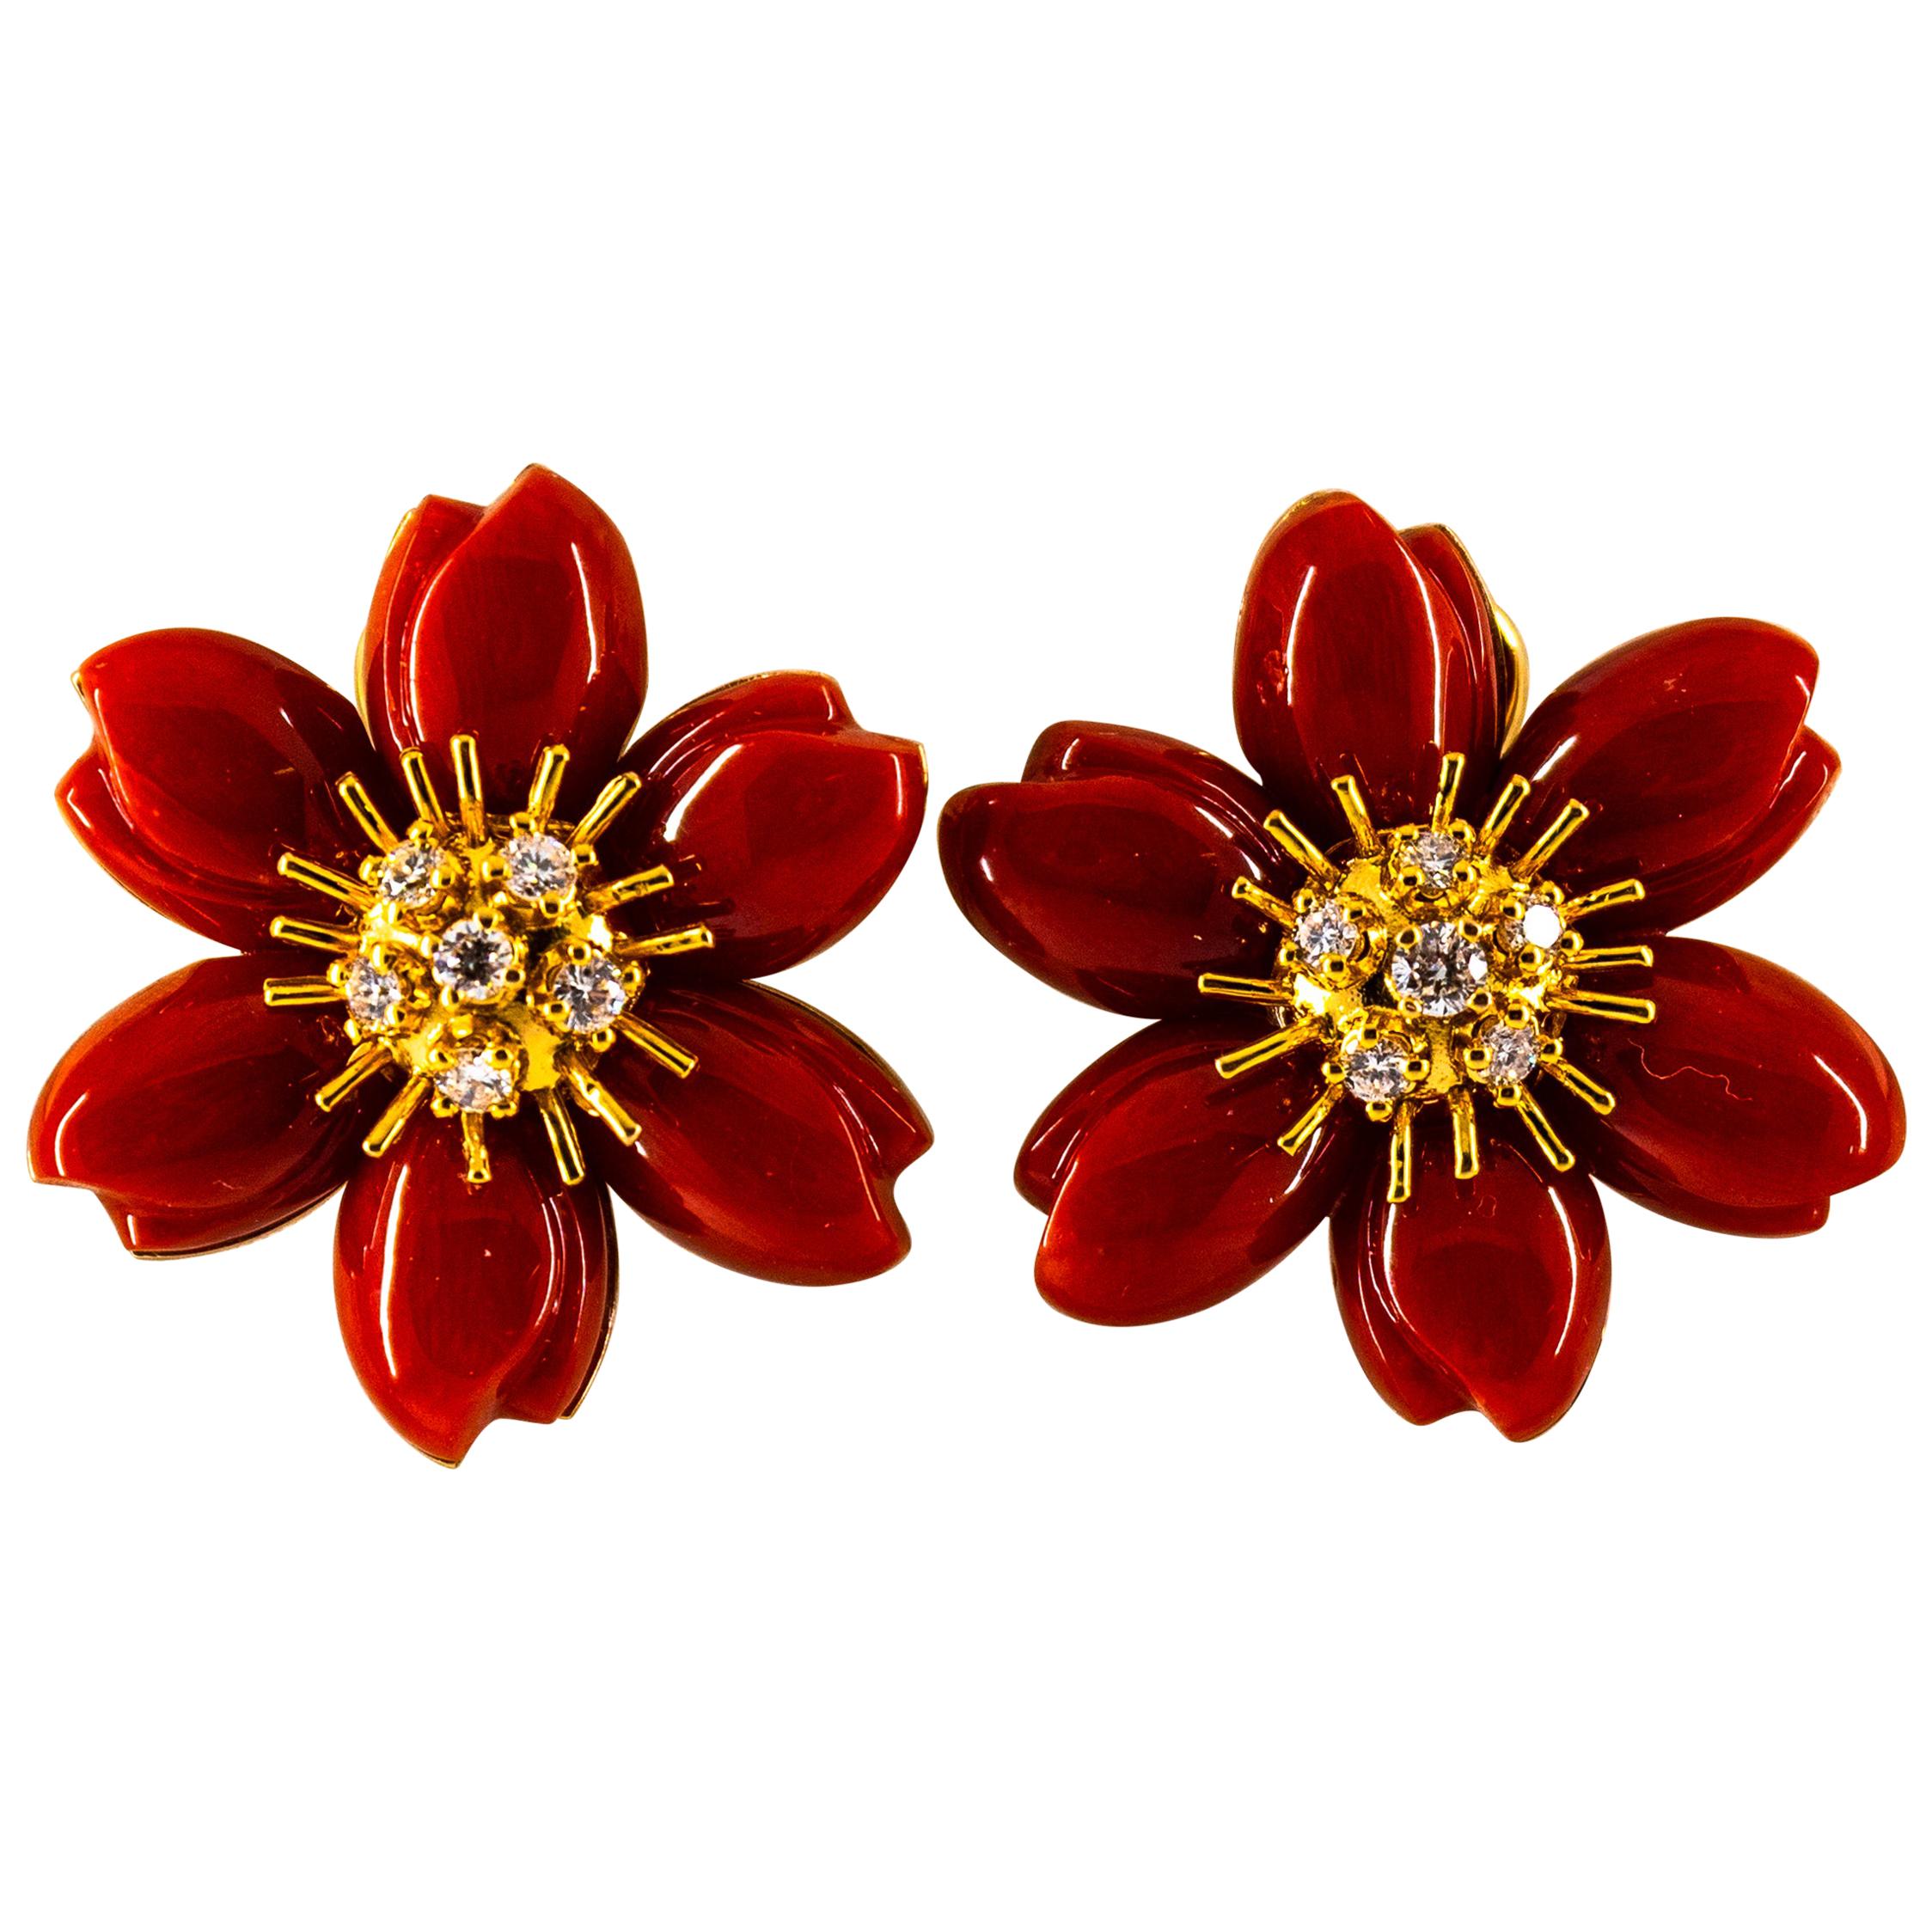 0.60 Carat White Diamond Mediterranean Red Coral Yellow Gold "Flowers" Earrings